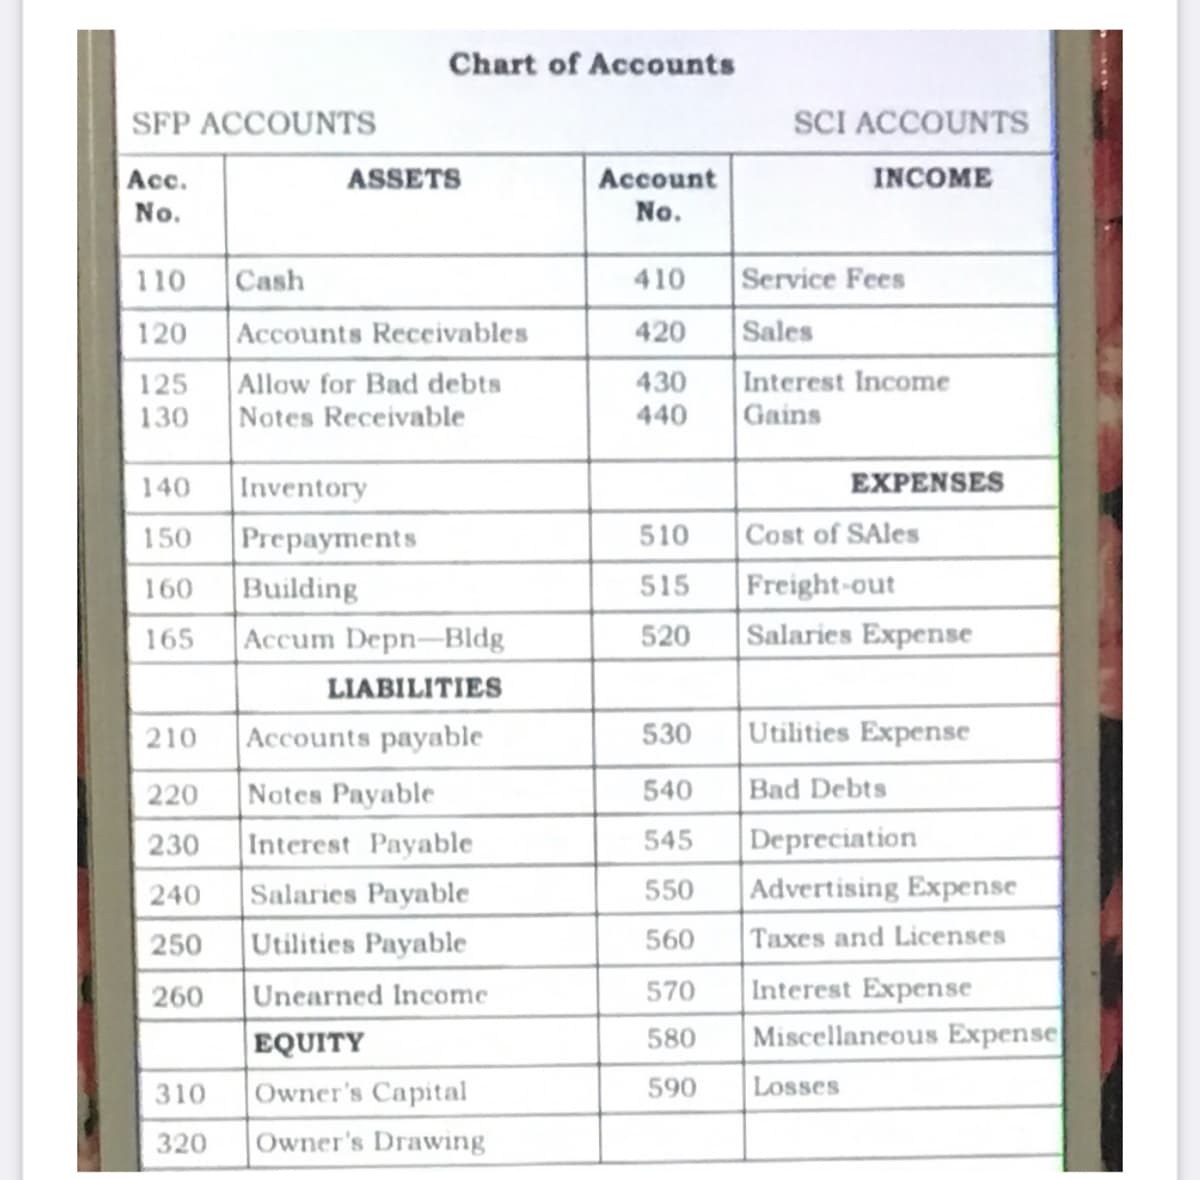 Chart of Accounts
SFP ACCOUNTS
SCI ACCOUNTS
Асс.
No.
ASSETS
Account
INCOME
No.
Service Fees
Sales
Interest Income
Gains
110
Cash
410
120
Accounts Receivables
420
Allow for Bad debts
430
440
125
130
Notes Receivable
140
Inventory
EXPENSES
Cost of SAles
Freight-out
Salaries Expense
150
510
Prepayments
Building
Accum Depn-Bldg
160
515
165
520
LIABILITIES
Utilities Expense
Accounts payable
Notes Payable
Interest Payable
210
530
220
540
Bad Debts
Depreciation
Advertising Expense
Taxes and Licenses
230
545
240
Salaries Payable
550
250
Utilities Payable
560
Interest Expense
Miscellancous Expense
260
Unearned Income
570
580
EQUITY
Owner's Capital
Owner's Drawing
310
590
Losses
320
